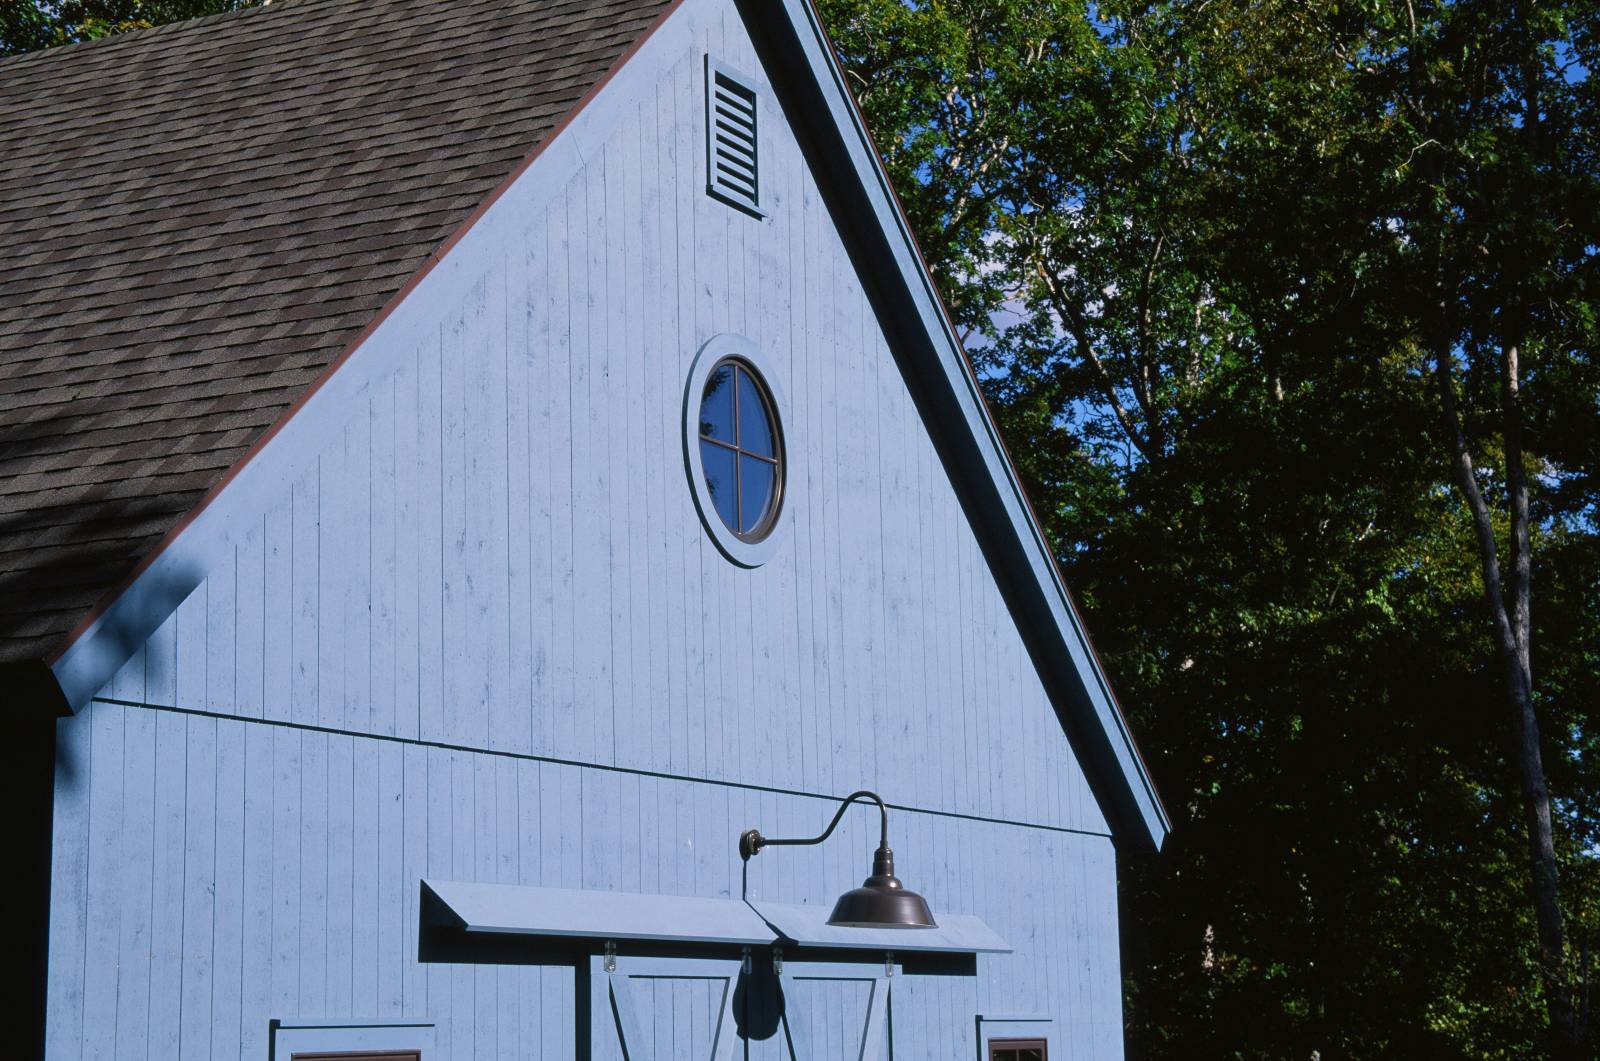 Round Window in the Gable